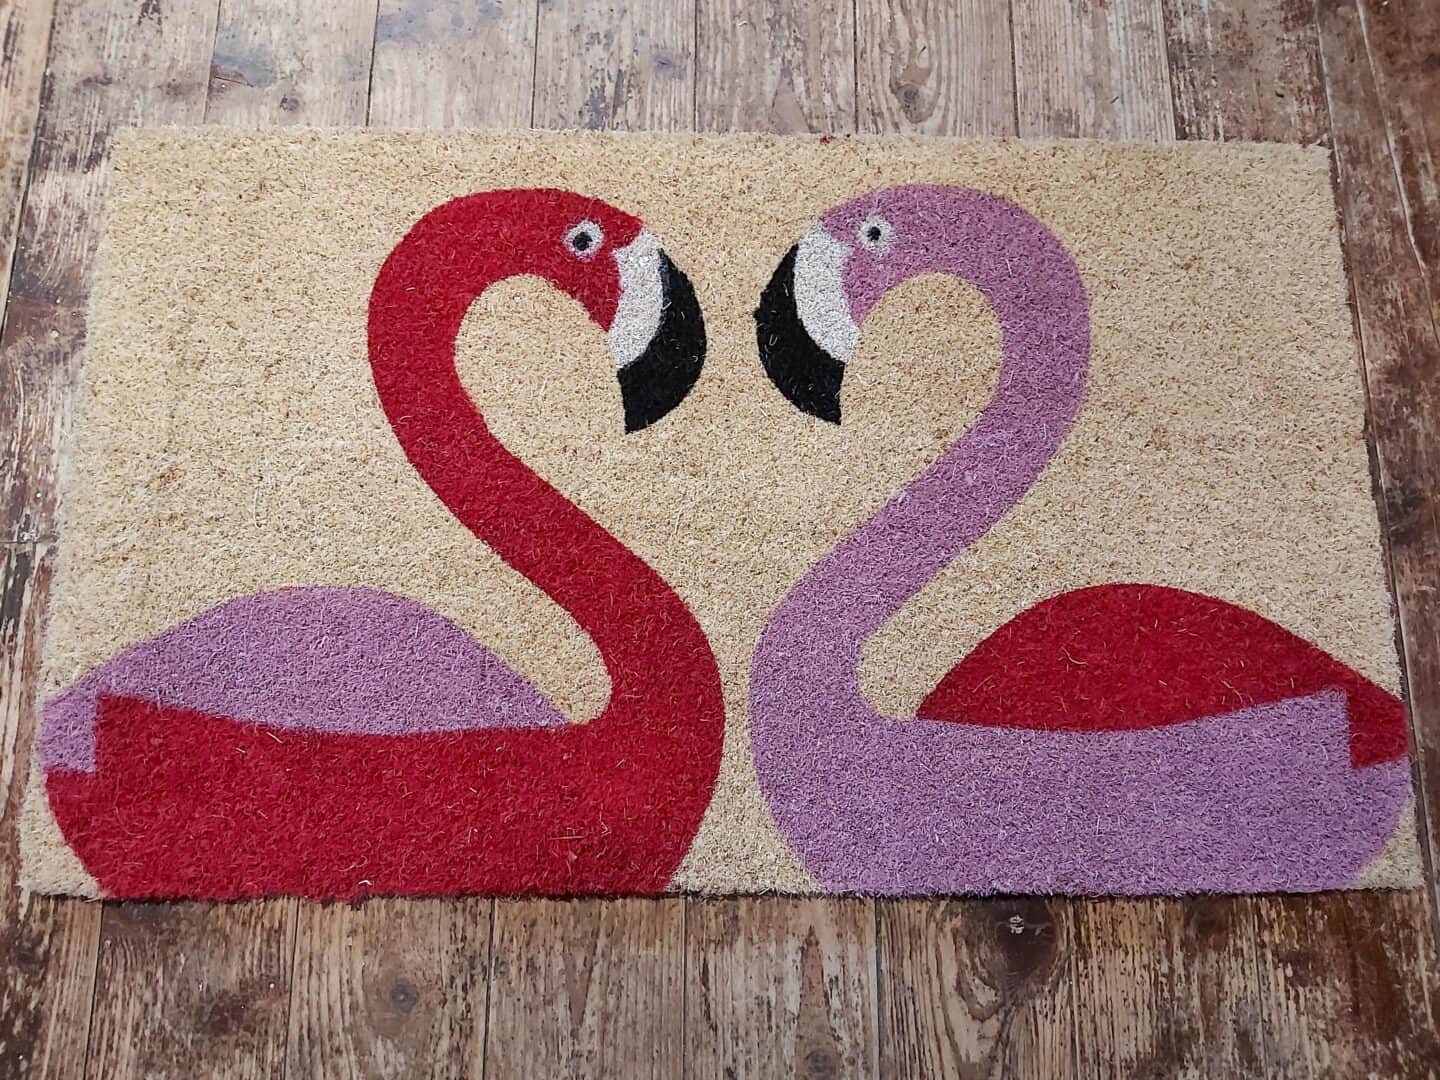 Nothing says happy lockdown valentine's day like two flamingos making a heart with their necks